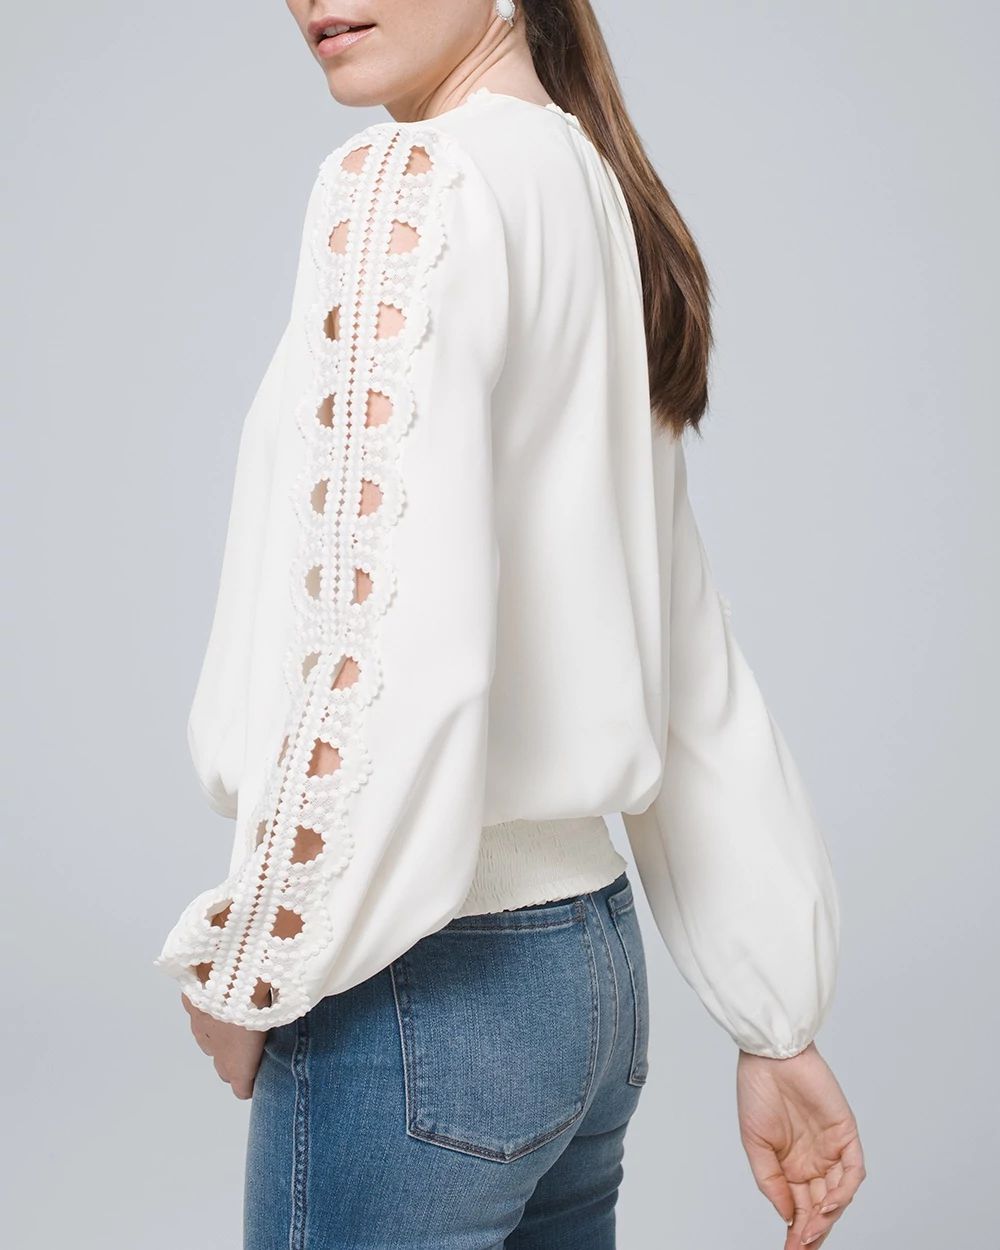 Embroidered Sleeve Blouse click to view larger image.